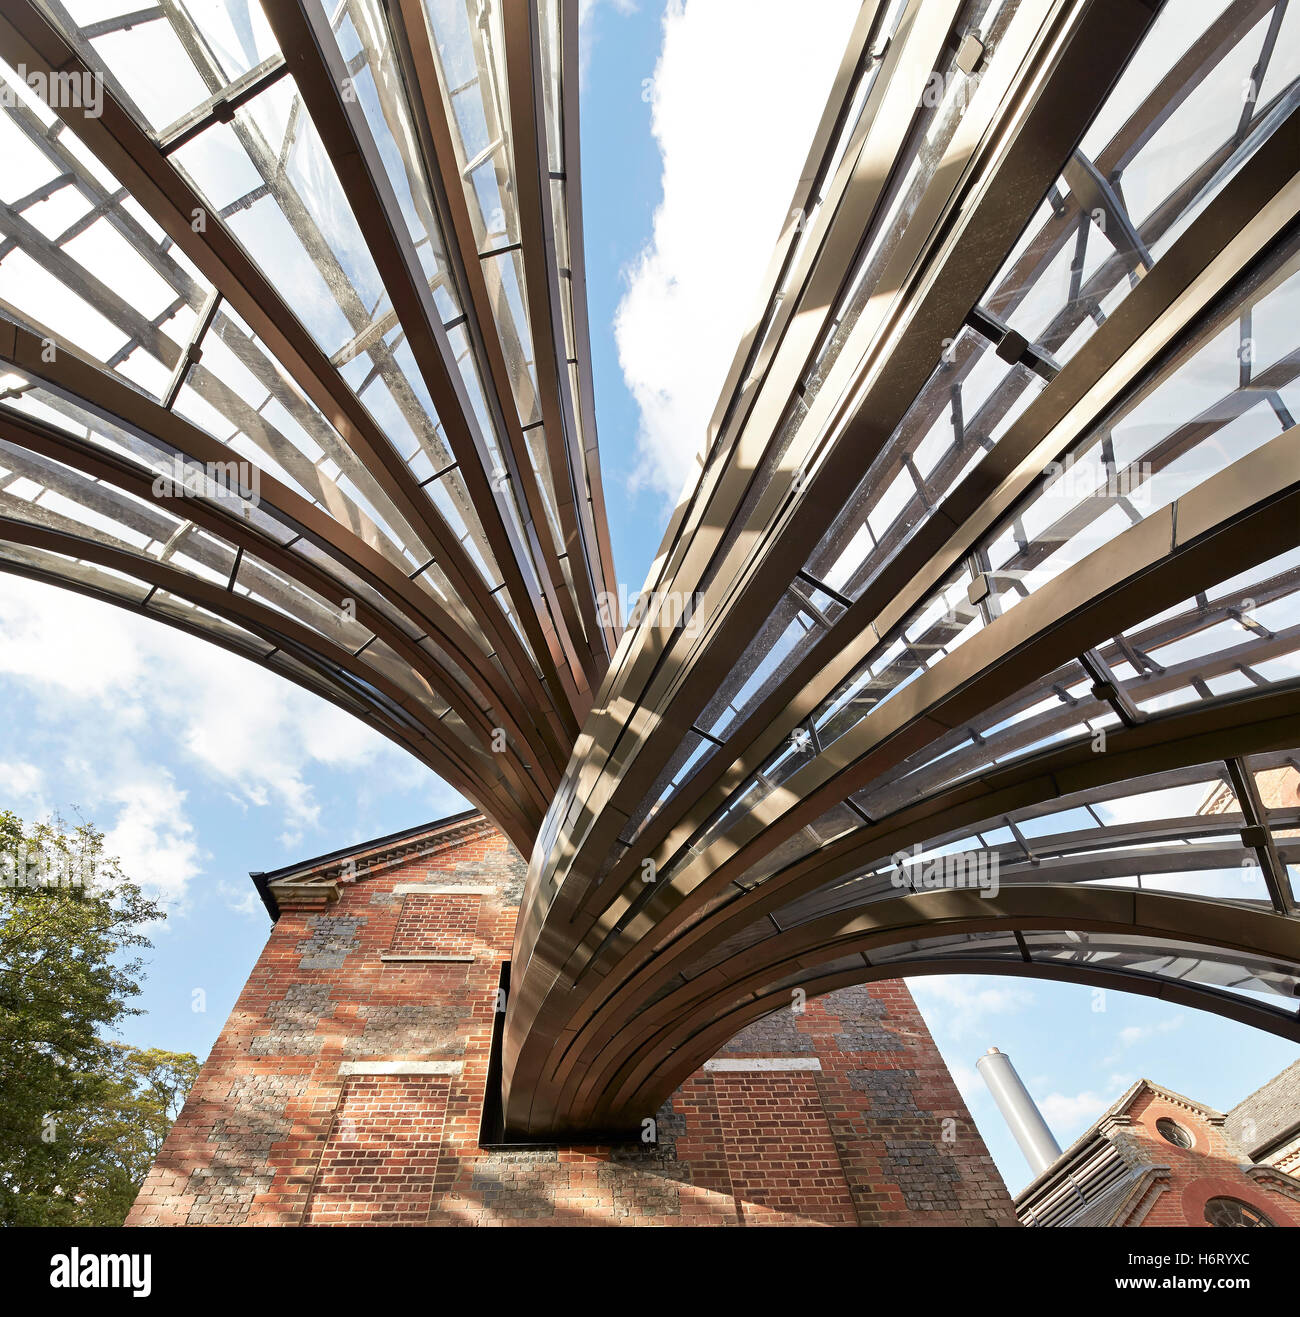 Glass and  metal piping connecting distillery room with greenhouses. Bombay Sapphire Distillery, Laverstoke, United Kingdom. Architect: Heatherwick, 2014. Stock Photo